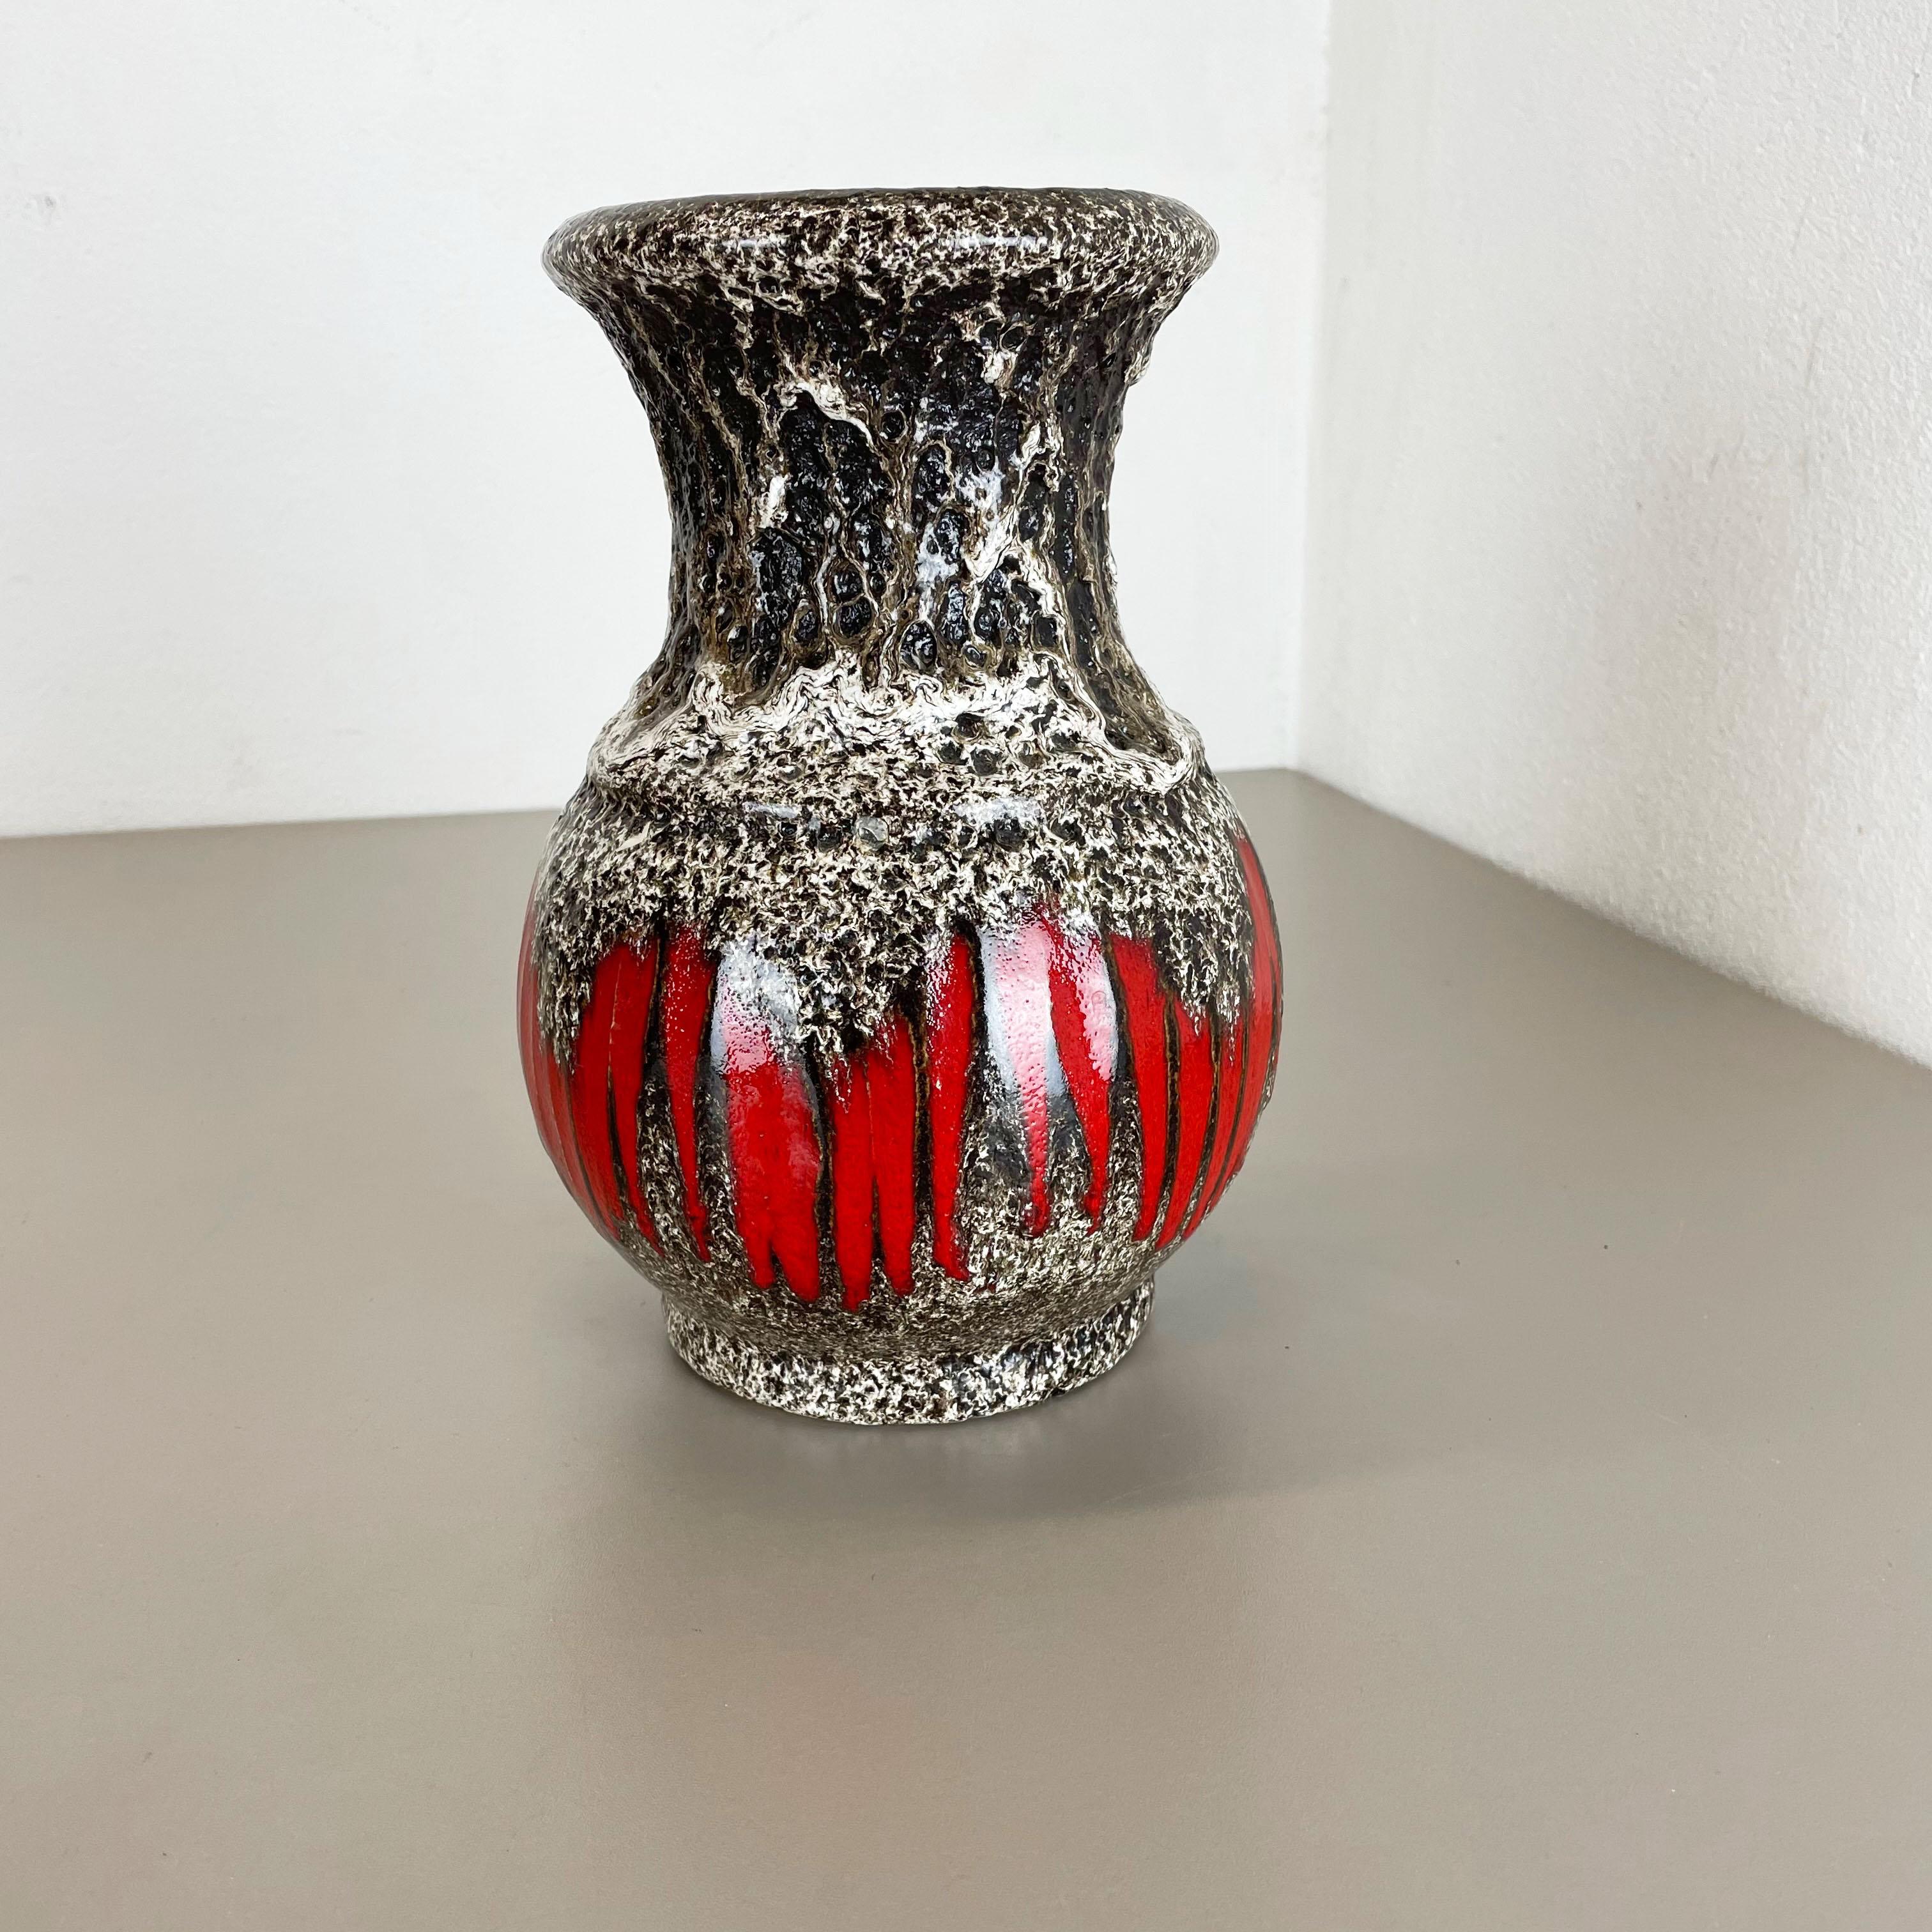 Article:

Fat lava art vase super rare black white red



Producer:

Scheurich, Germany



Decade:

1970s




This original vintage vase was produced in the 1970s in Germany by Scheurich. It is made of ceramic pottery in fat lava